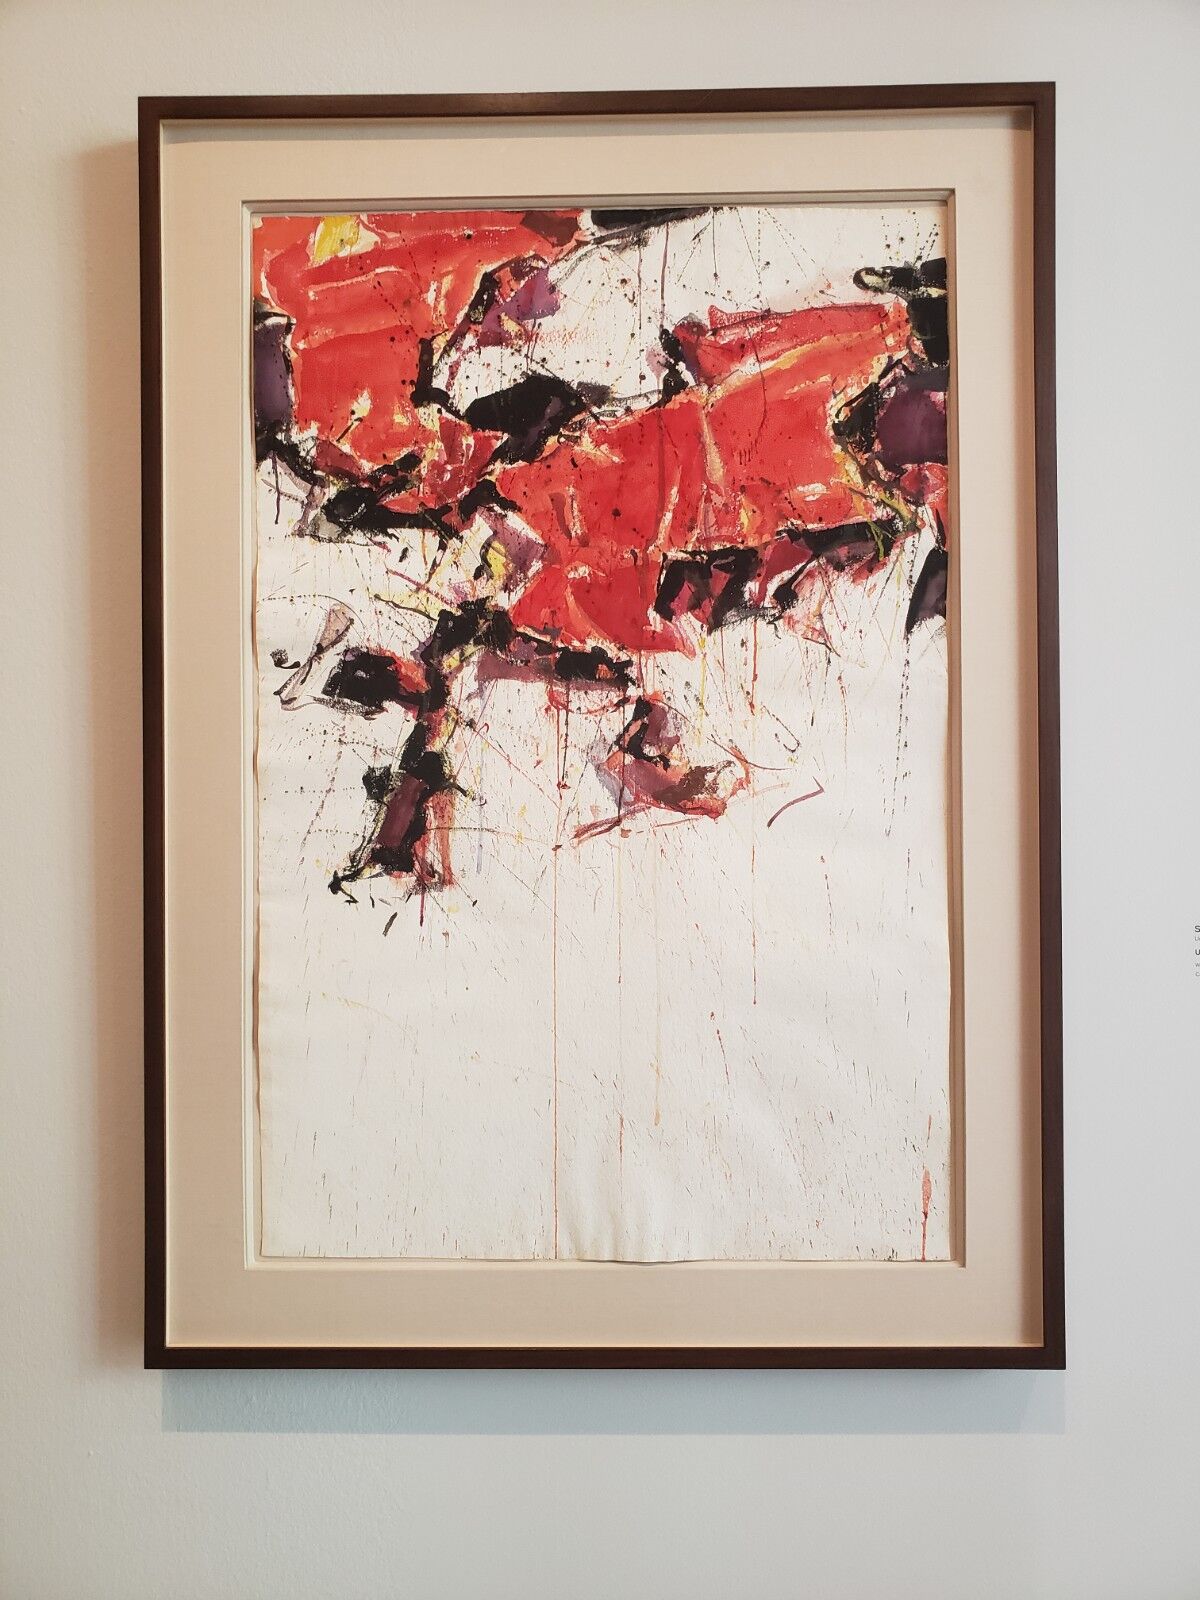 A framed abstract painting by Sam Francis